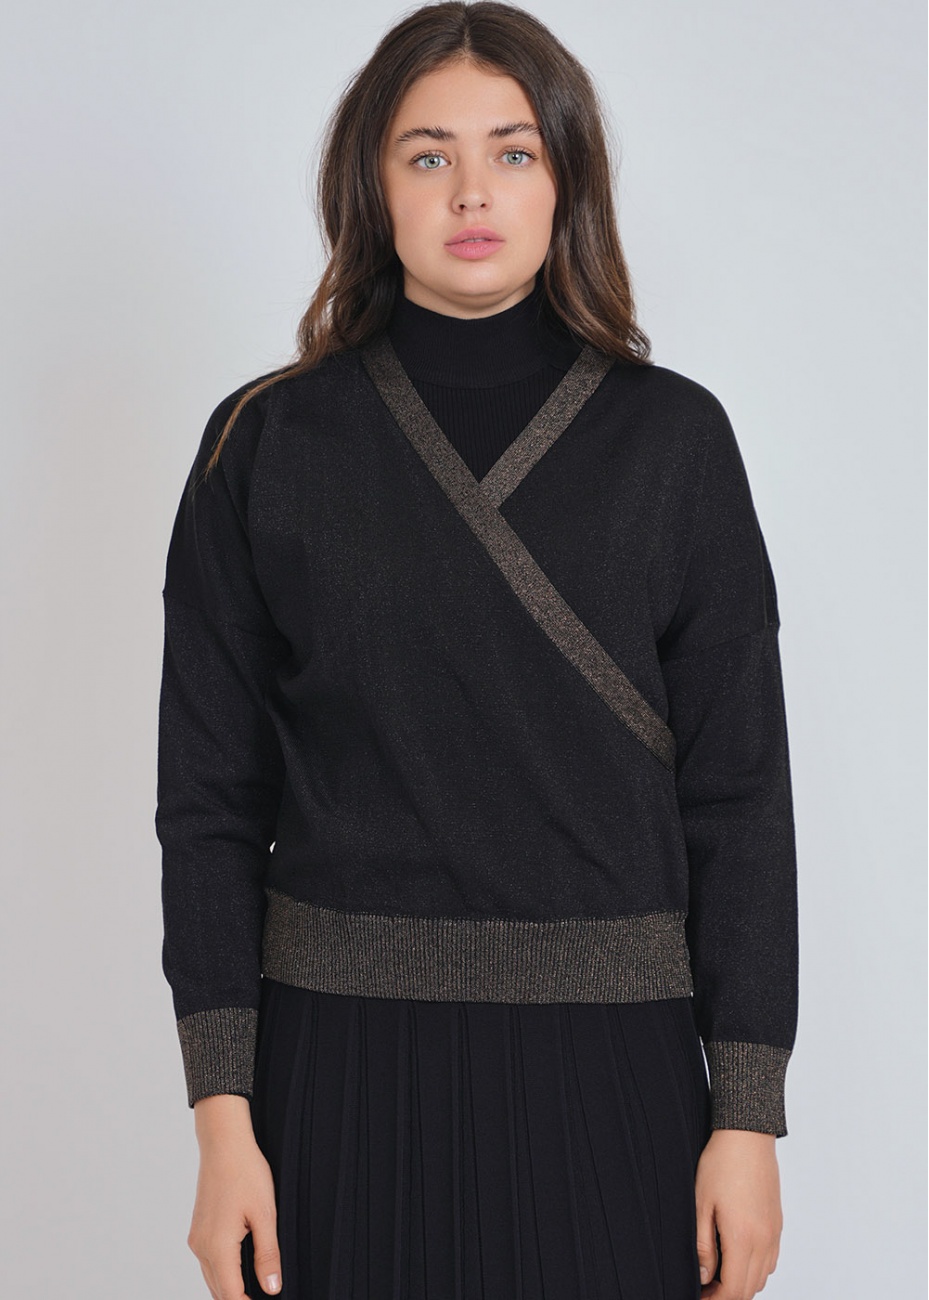 Black V-Neck Sweater with Brown Edges